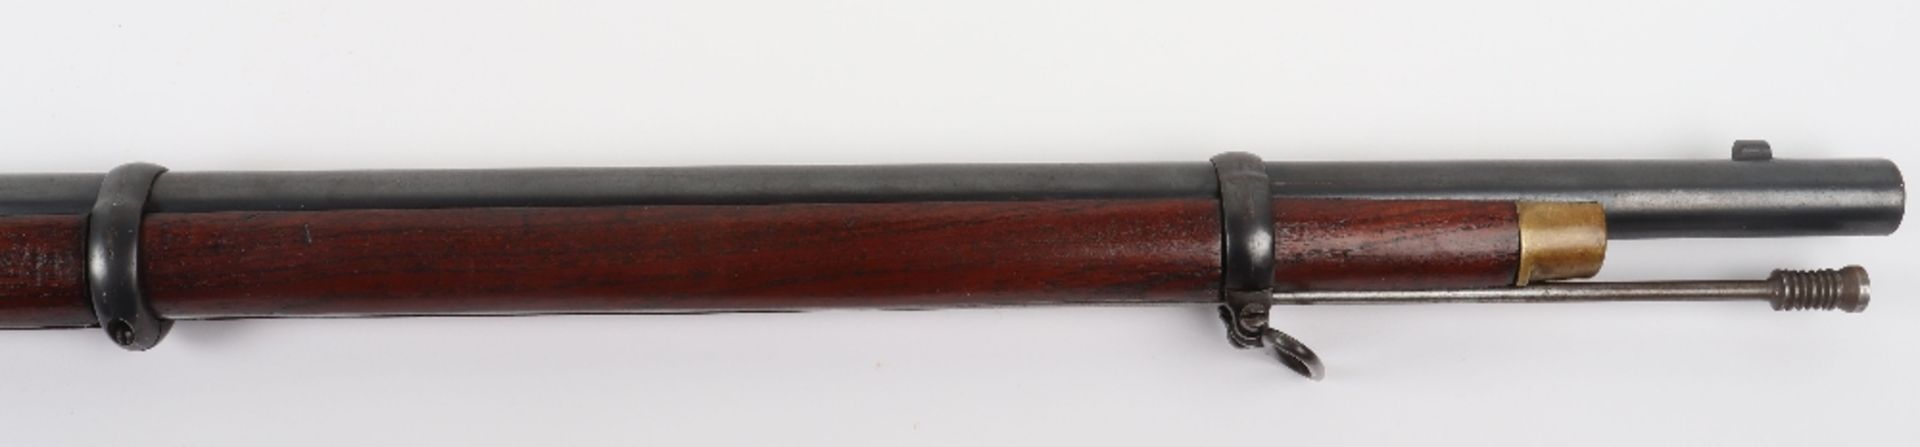 14 Bore Indian Military Style Percussion Musket - Image 5 of 9